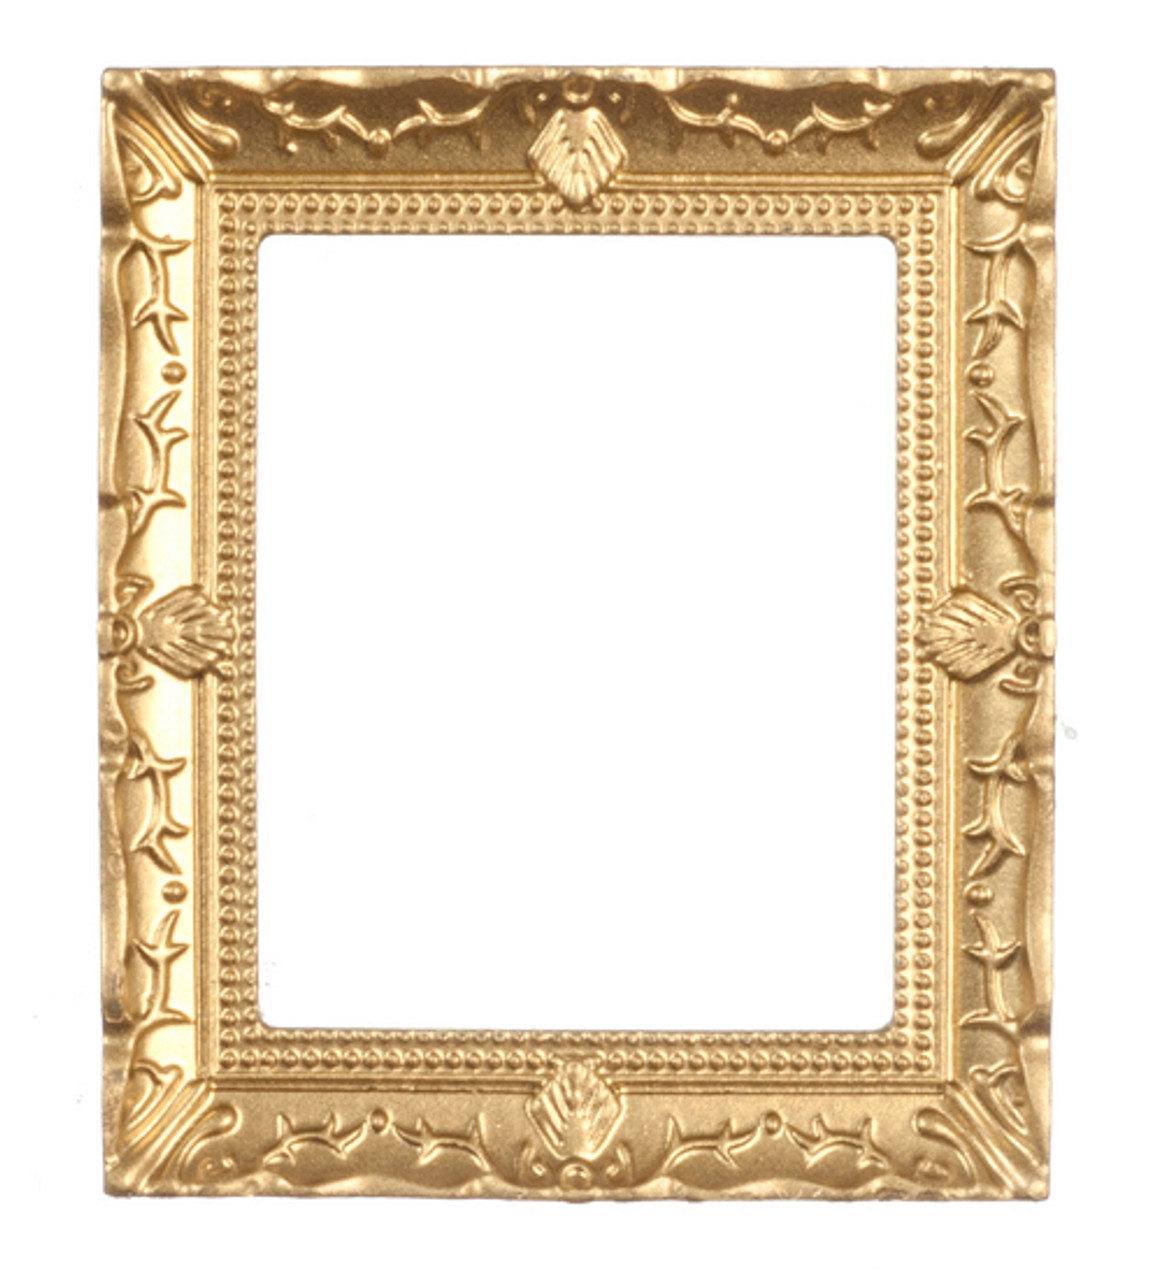 Frame - Large and Gold